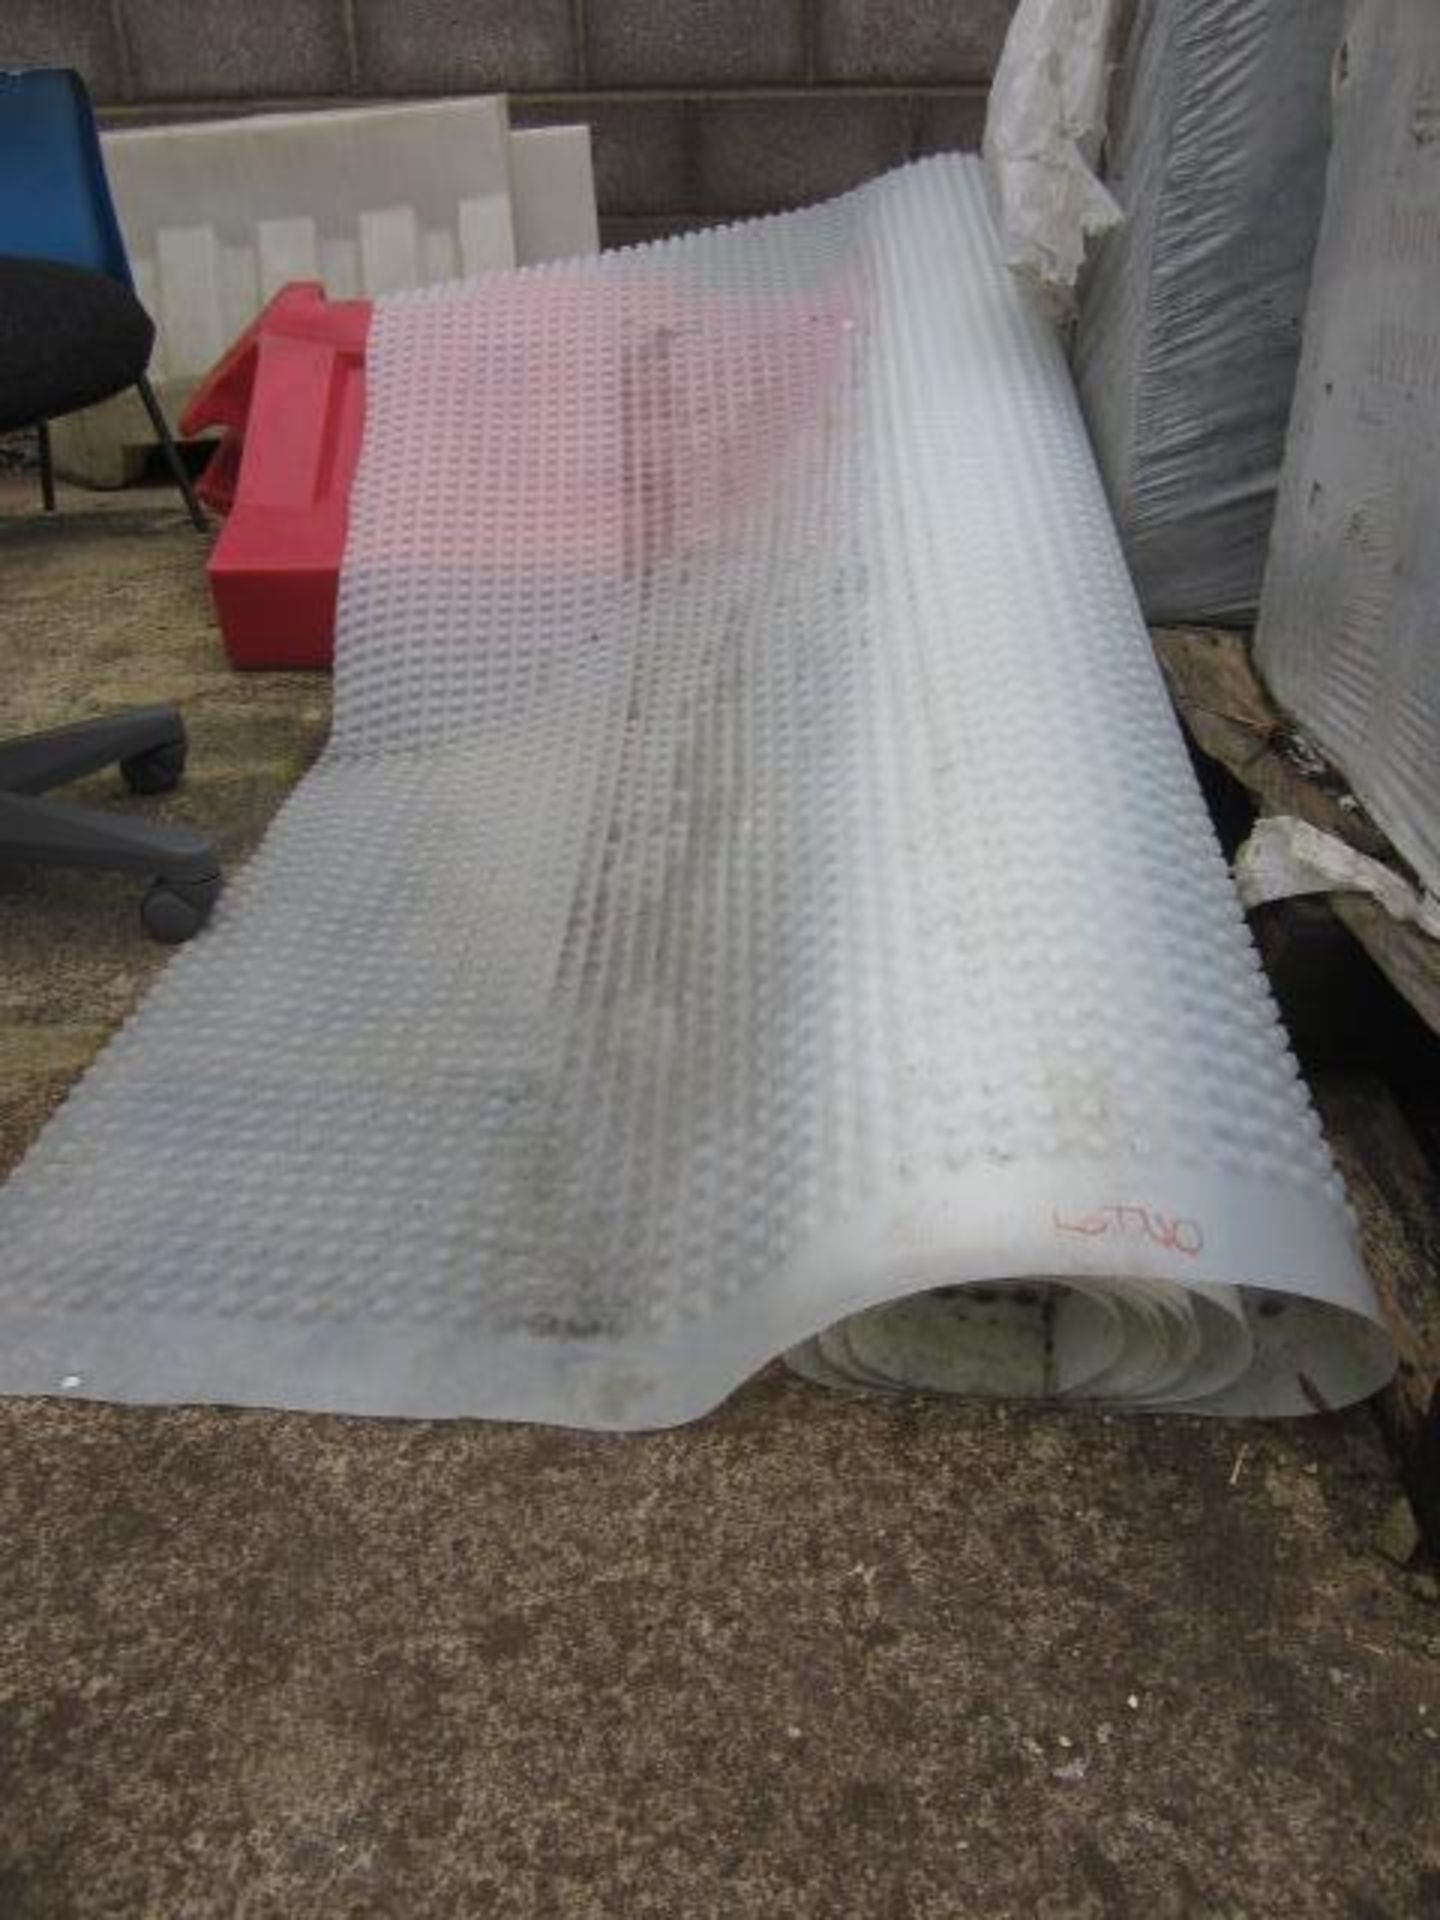 1 full and part roll of Isola matting. Located The Nurseries, New Passage Road, Pilning, Bristol, - Image 3 of 3